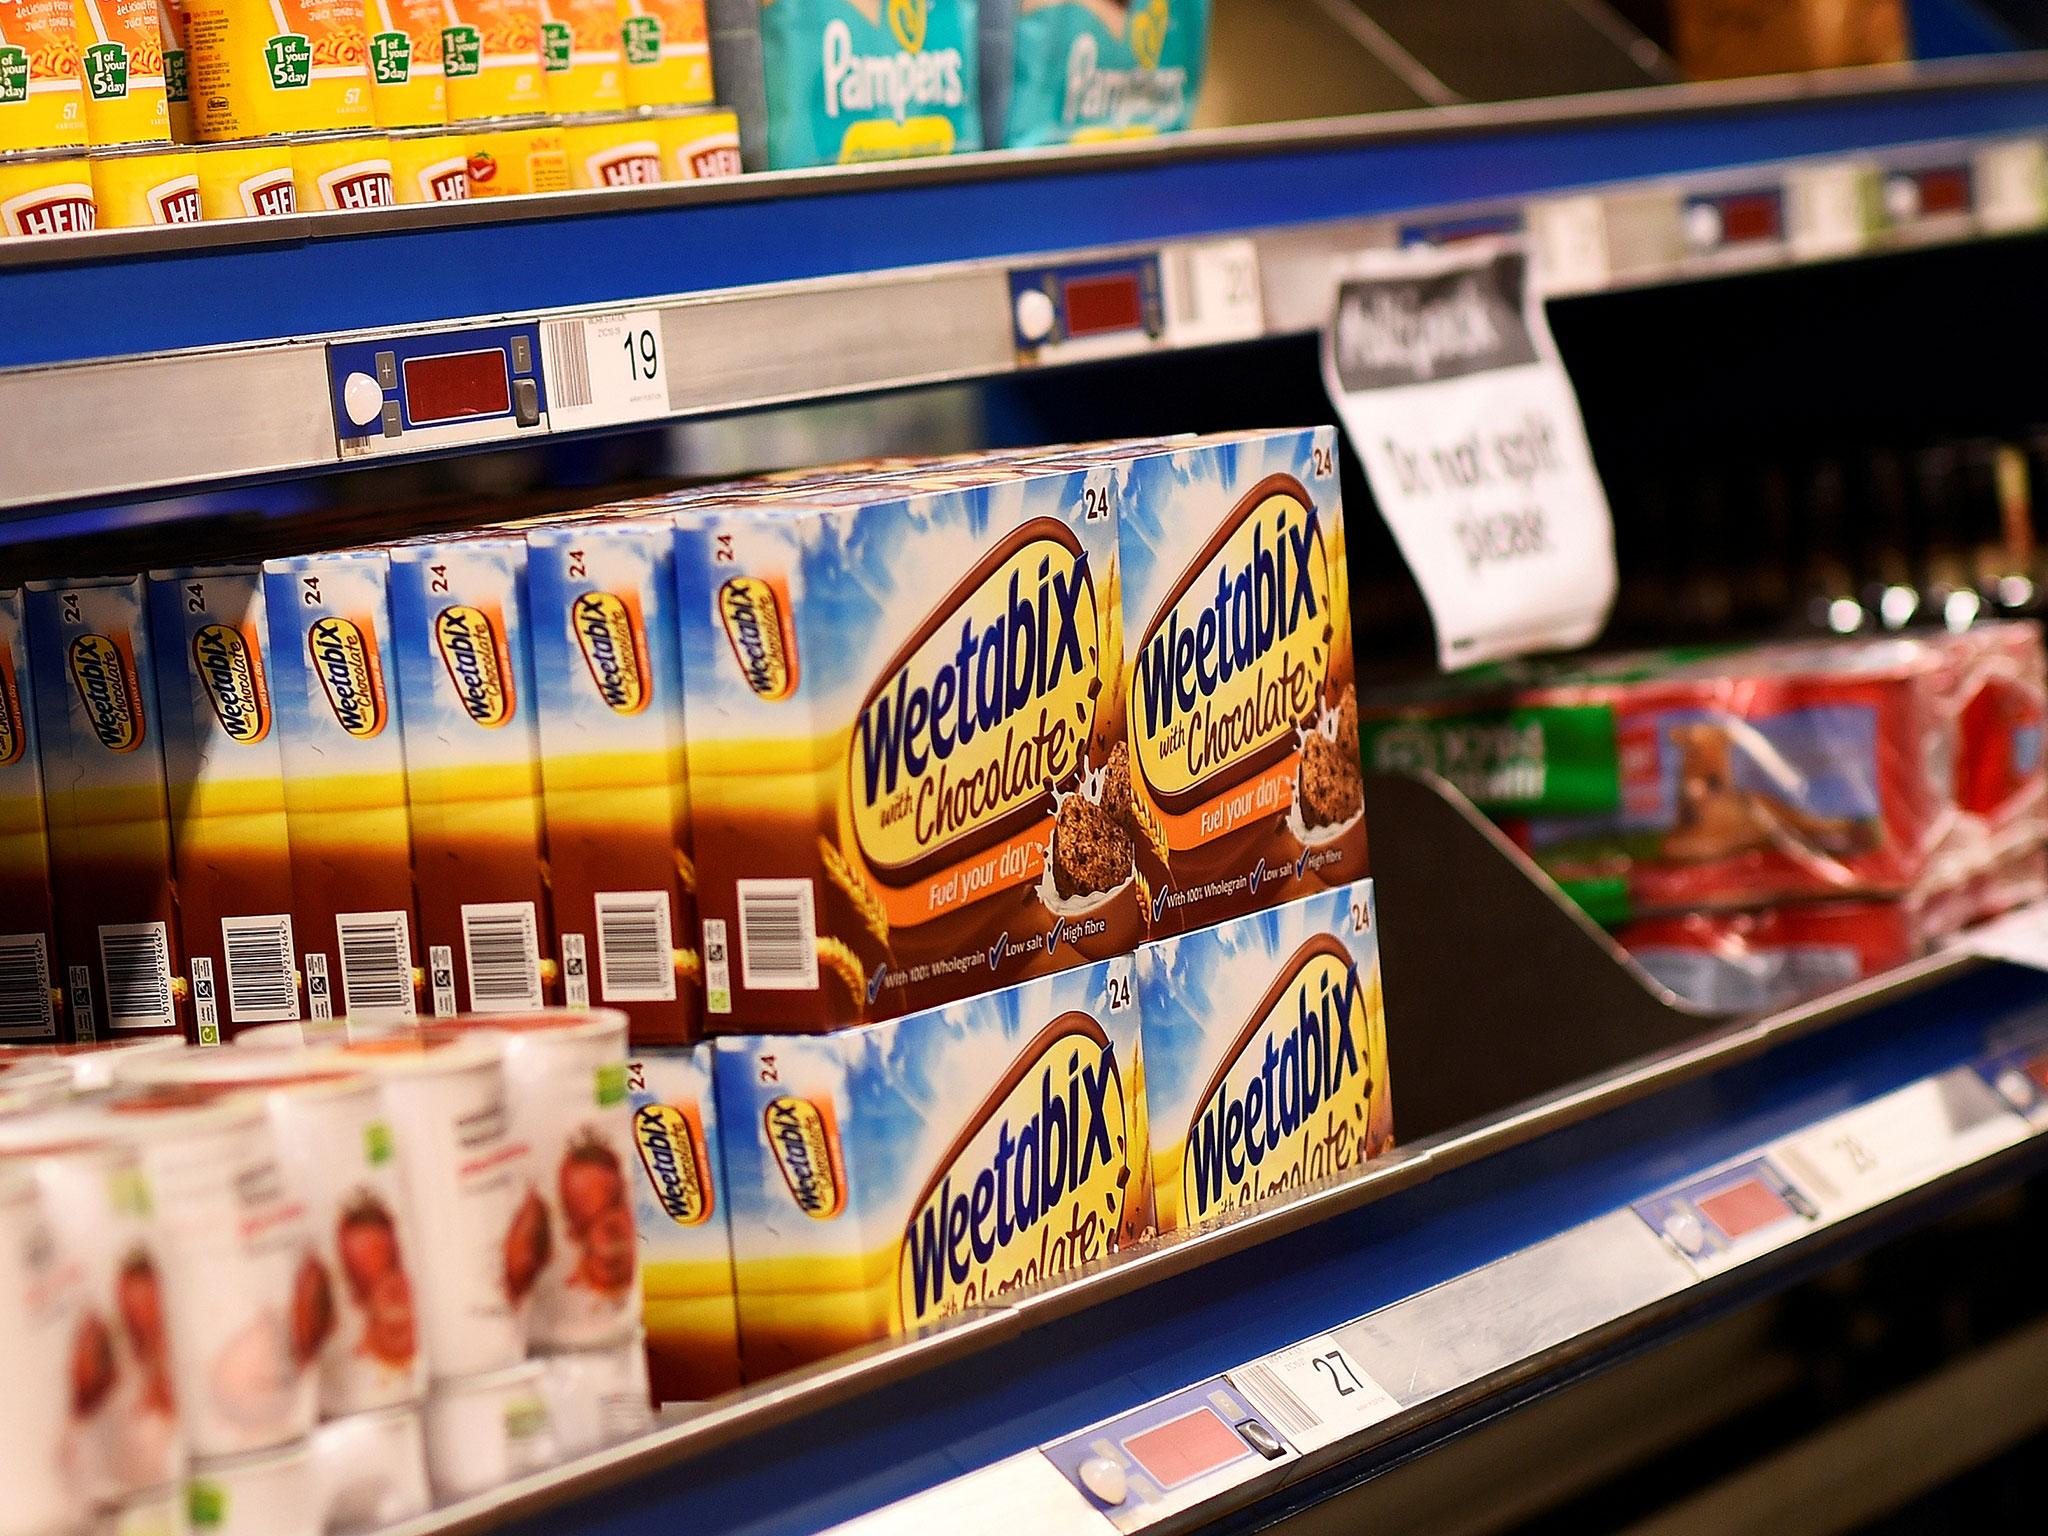 Shanghai-headquartered Bright Foods bought a majority stake in Weetabix In 2012